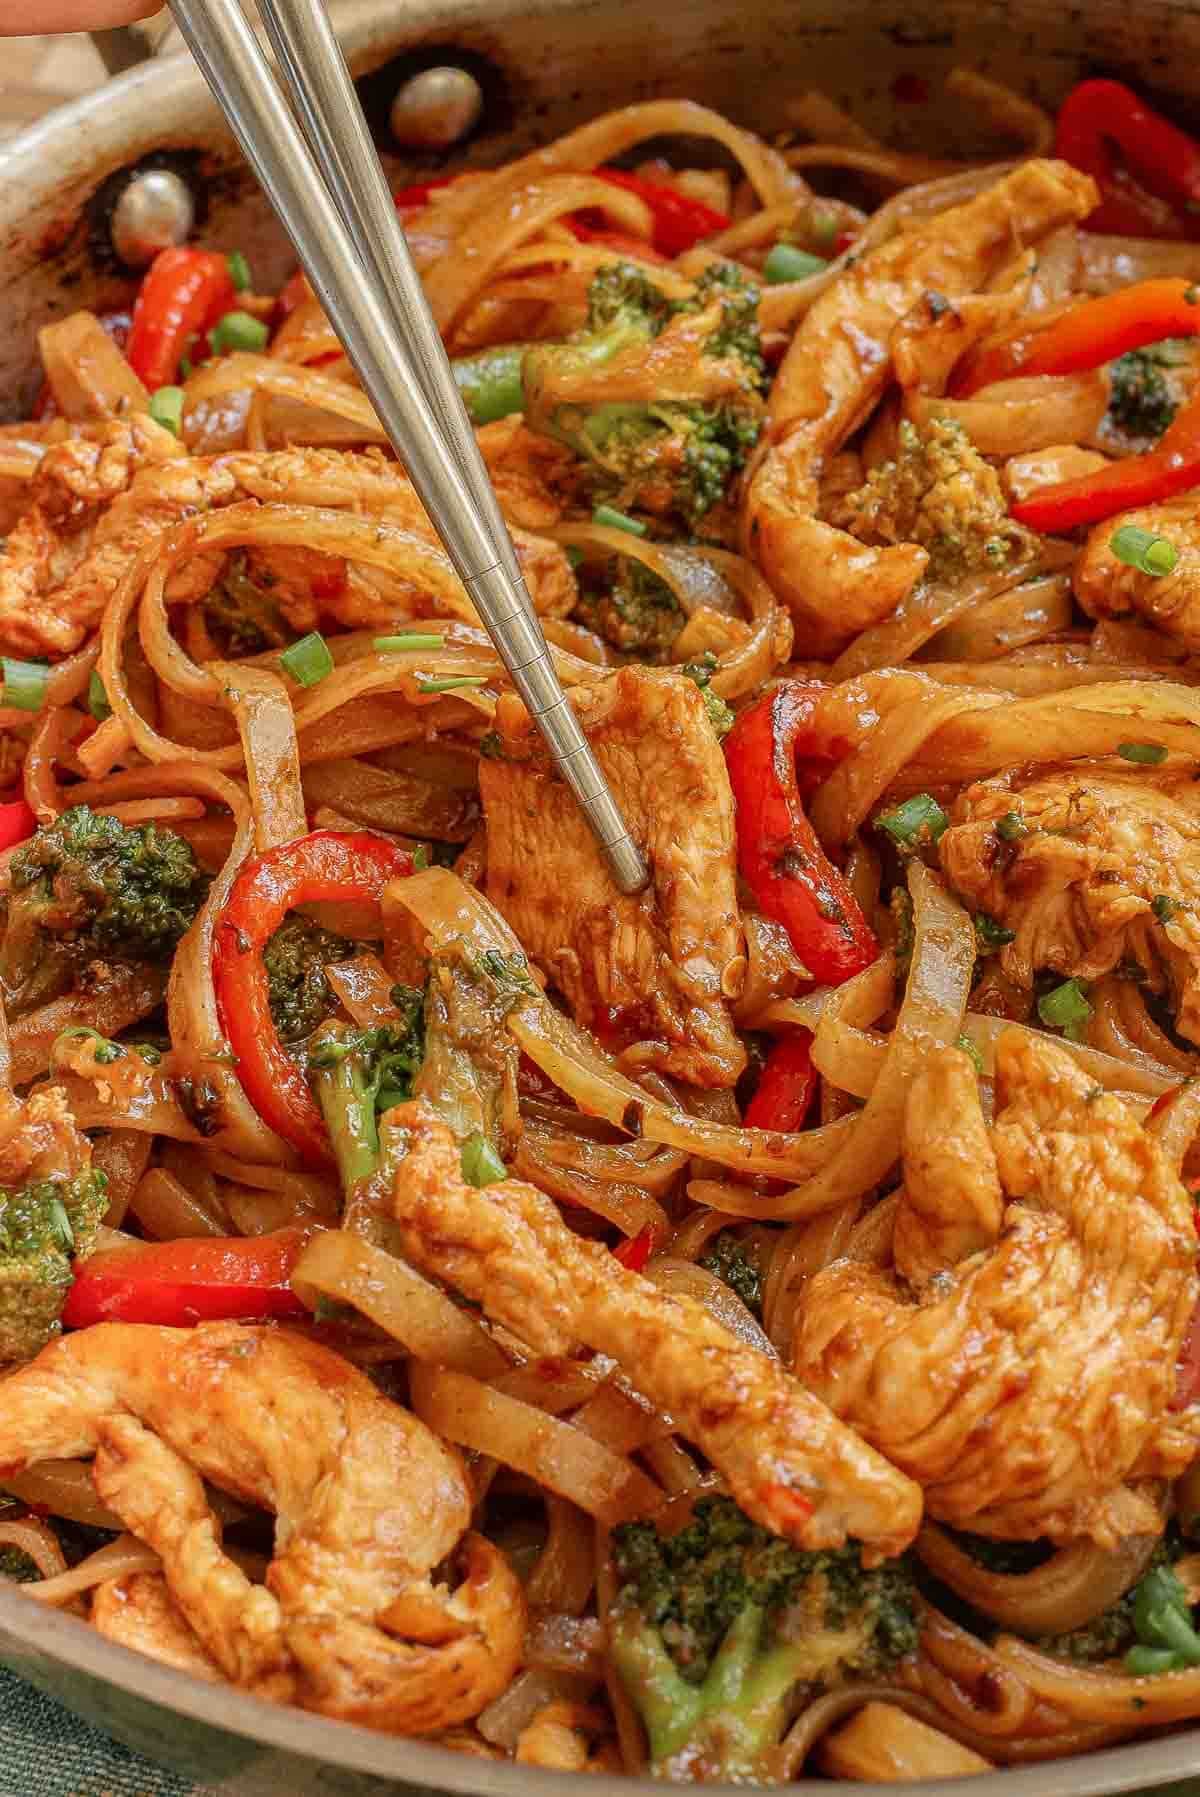 A skillet full of drunken noodles recipe with chicken, broccoli and red peppers.